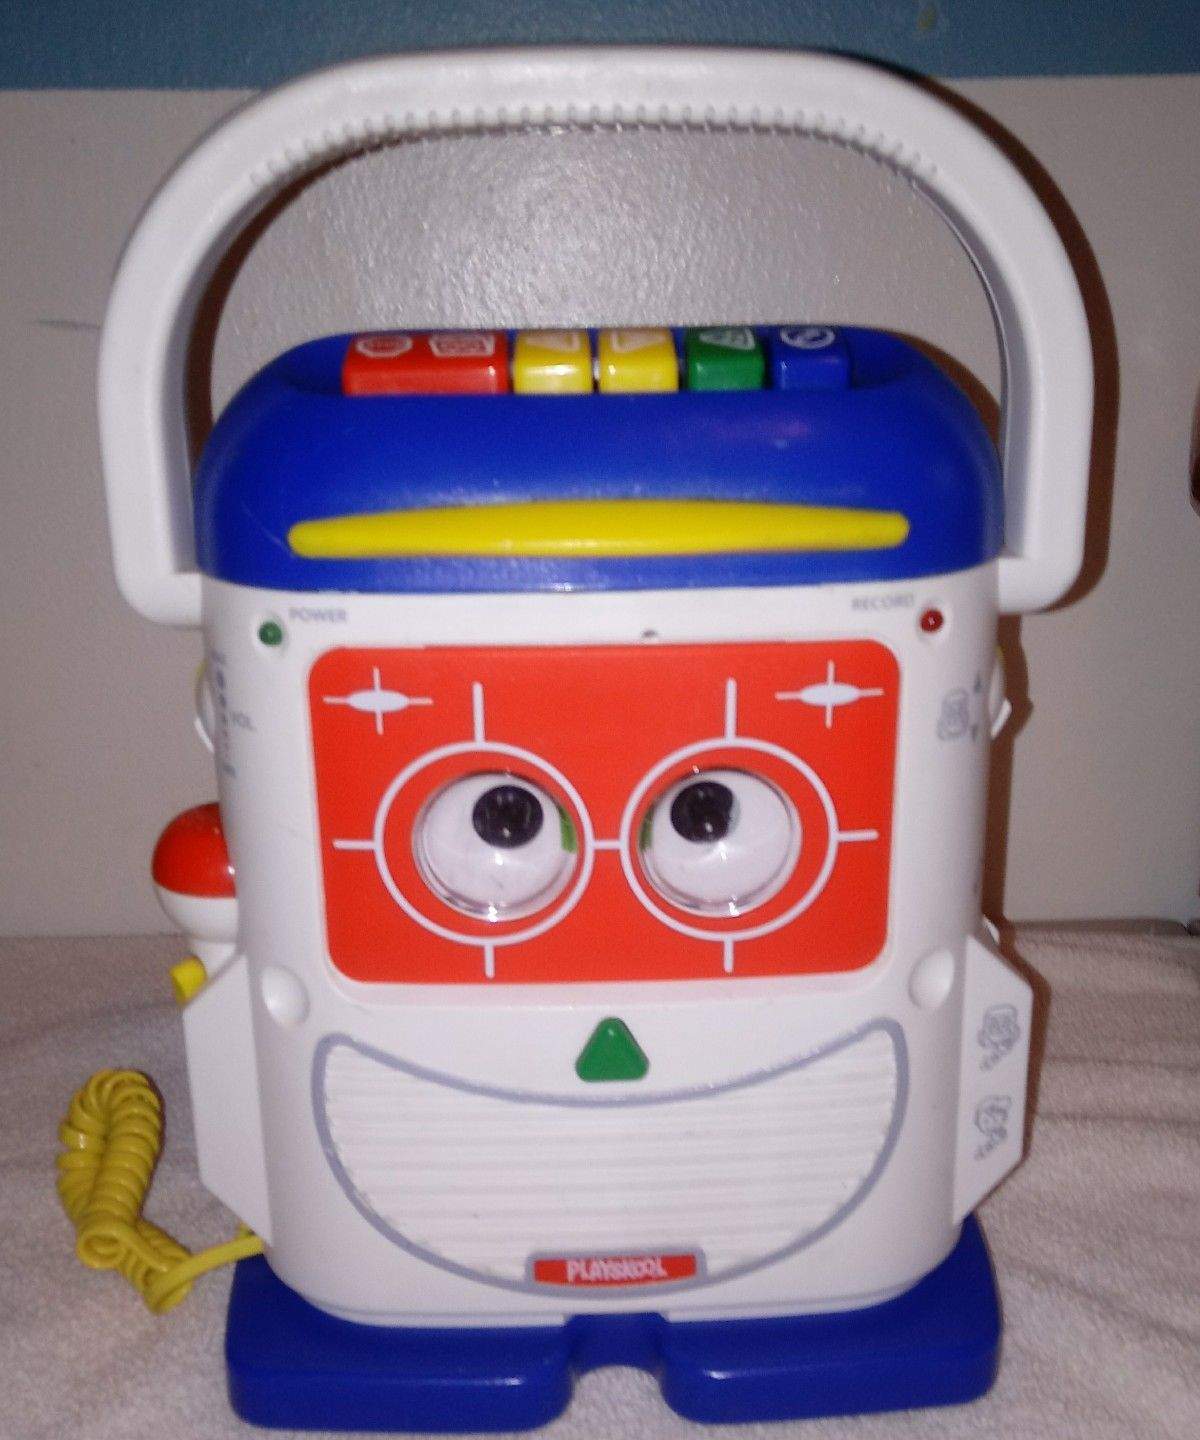 Mr. Mike by Playskool, Model PS-368/468 - The Old Robots Web Site